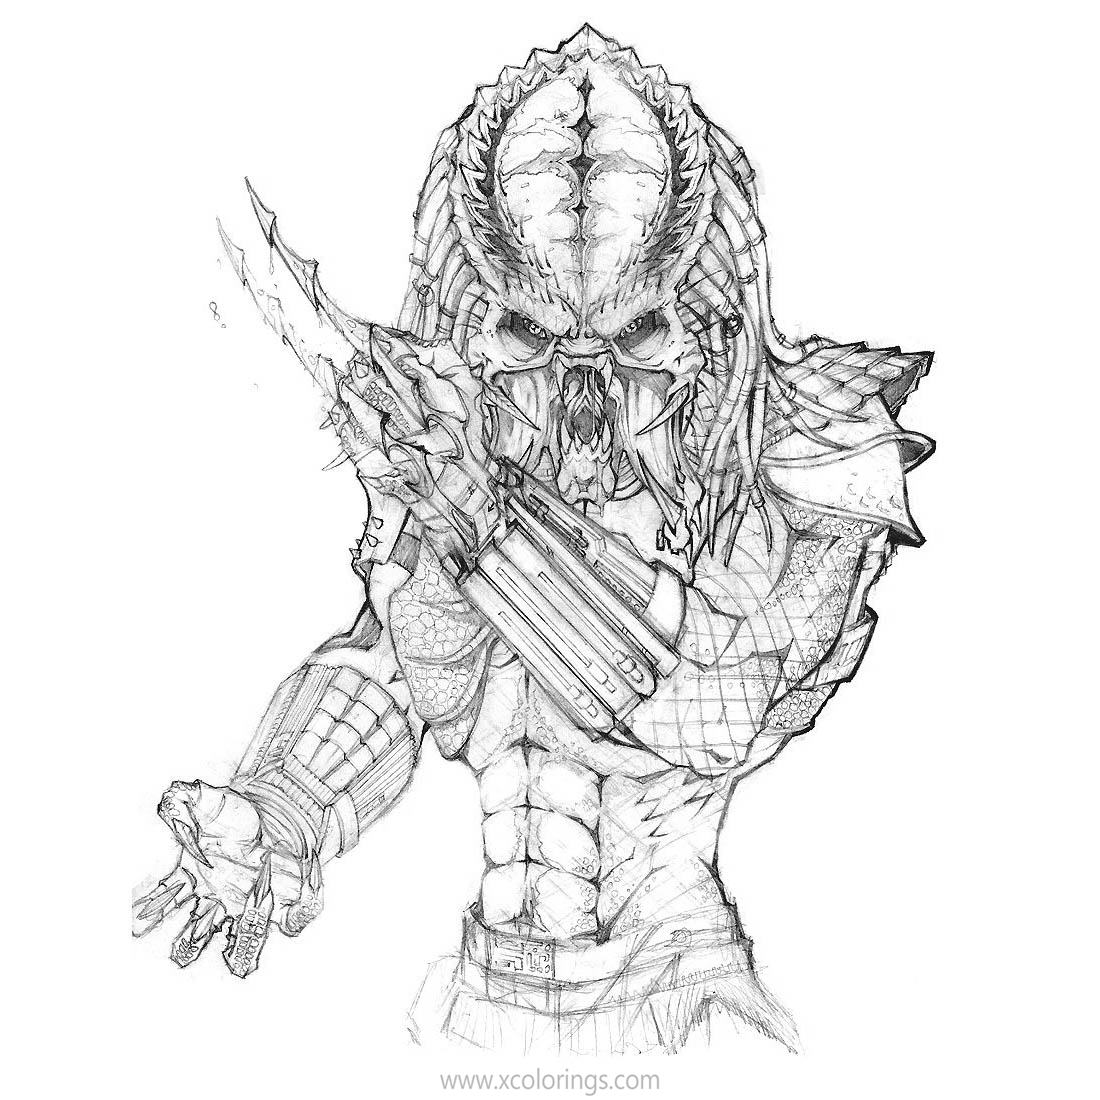 Predator Coloring Pages Free and Printable